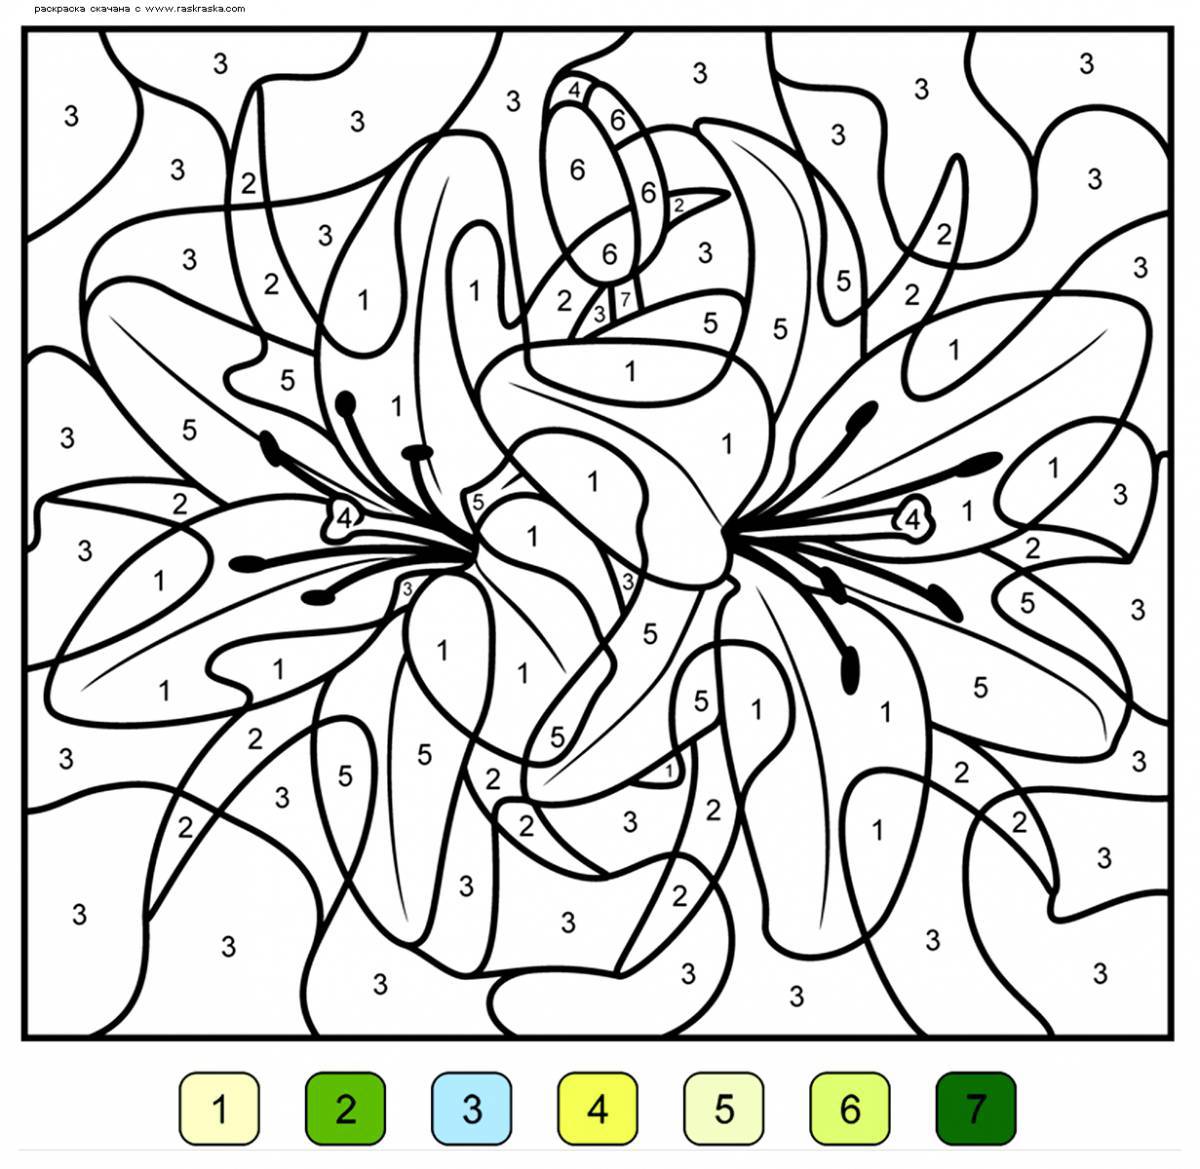 Intriguing coloring book with numbers